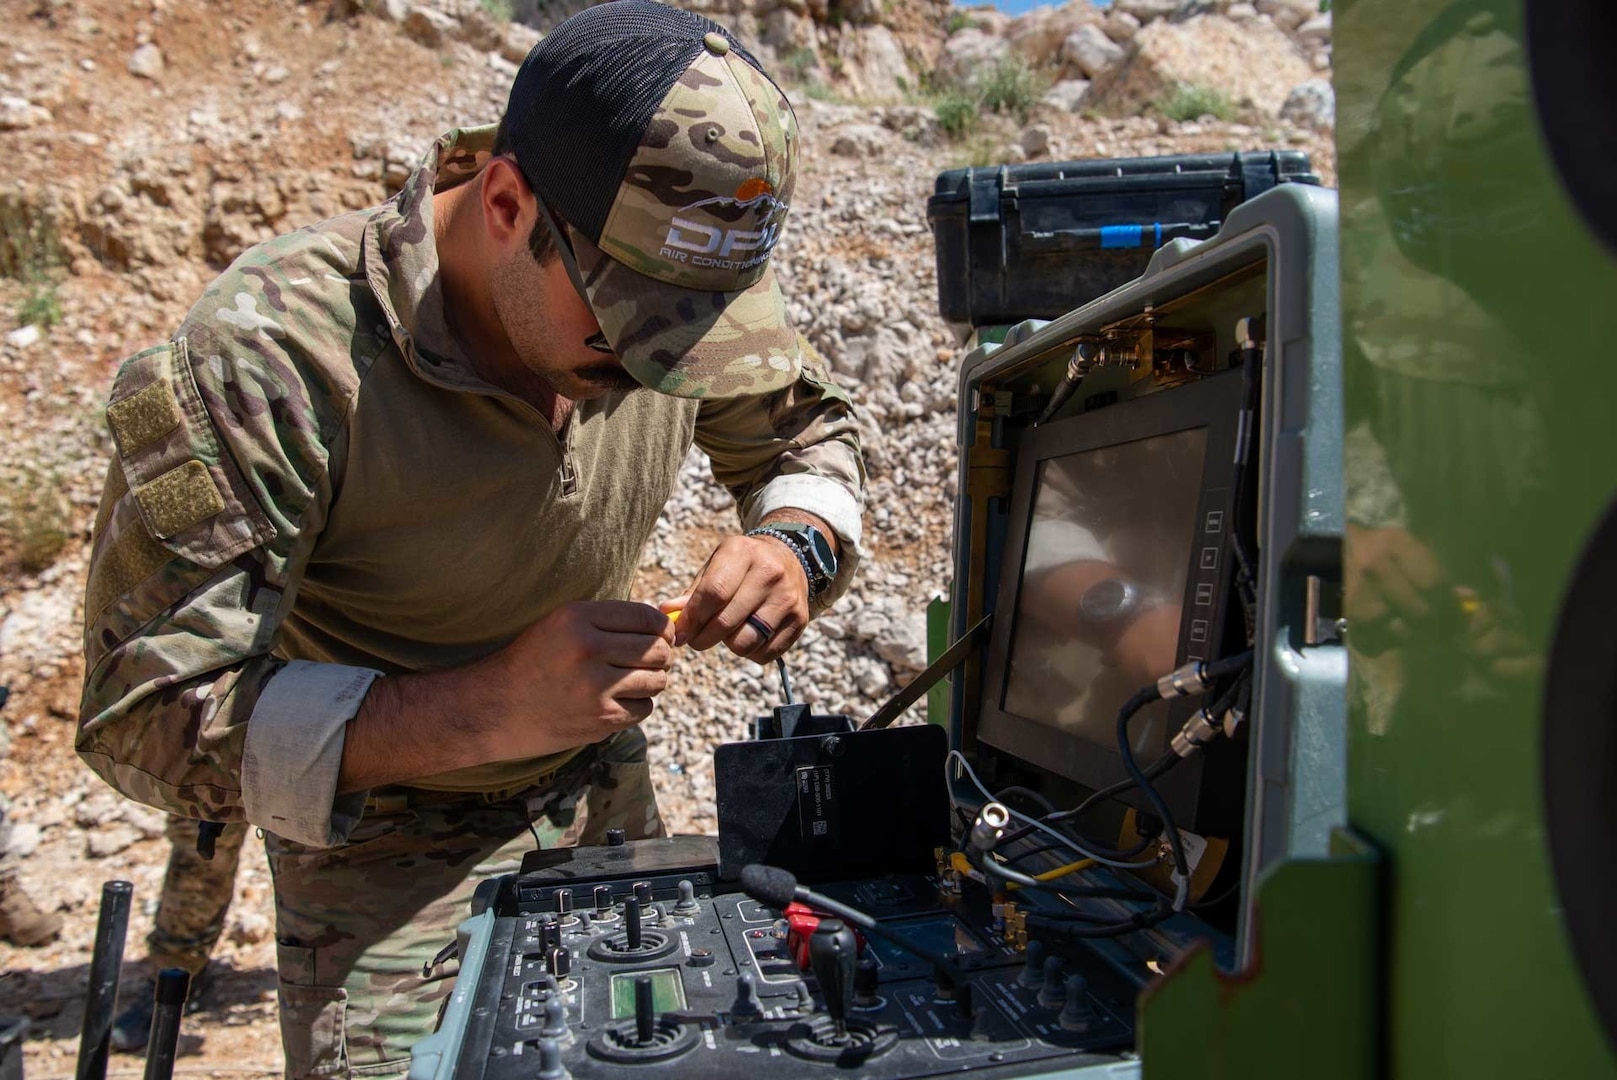 210520-N-KC128-0044 WATA EL JAOUZ, Lebanon (May 20, 2021) – An explosive ordnance disposal technician assigned to Commander, Task Force 56 assembles a Talon bomb disposal robot system during a counter-improvised explosive device subject matter expert exchange with members of the Lebanese Armed Forces as part of exercise Resolute Union 21 at Wata El Jaouz, Lebanon, May 20. Resolute Union 21 is an annual, bilateral explosive ordnance disposal and maritime security exercise between U.S. 5th Fleet and Lebanese Armed Forces to enhance mutual capabilities and interoperability. (U.S. Navy photo by Mass Communication Specialist 1st Class Daniel Hinton)